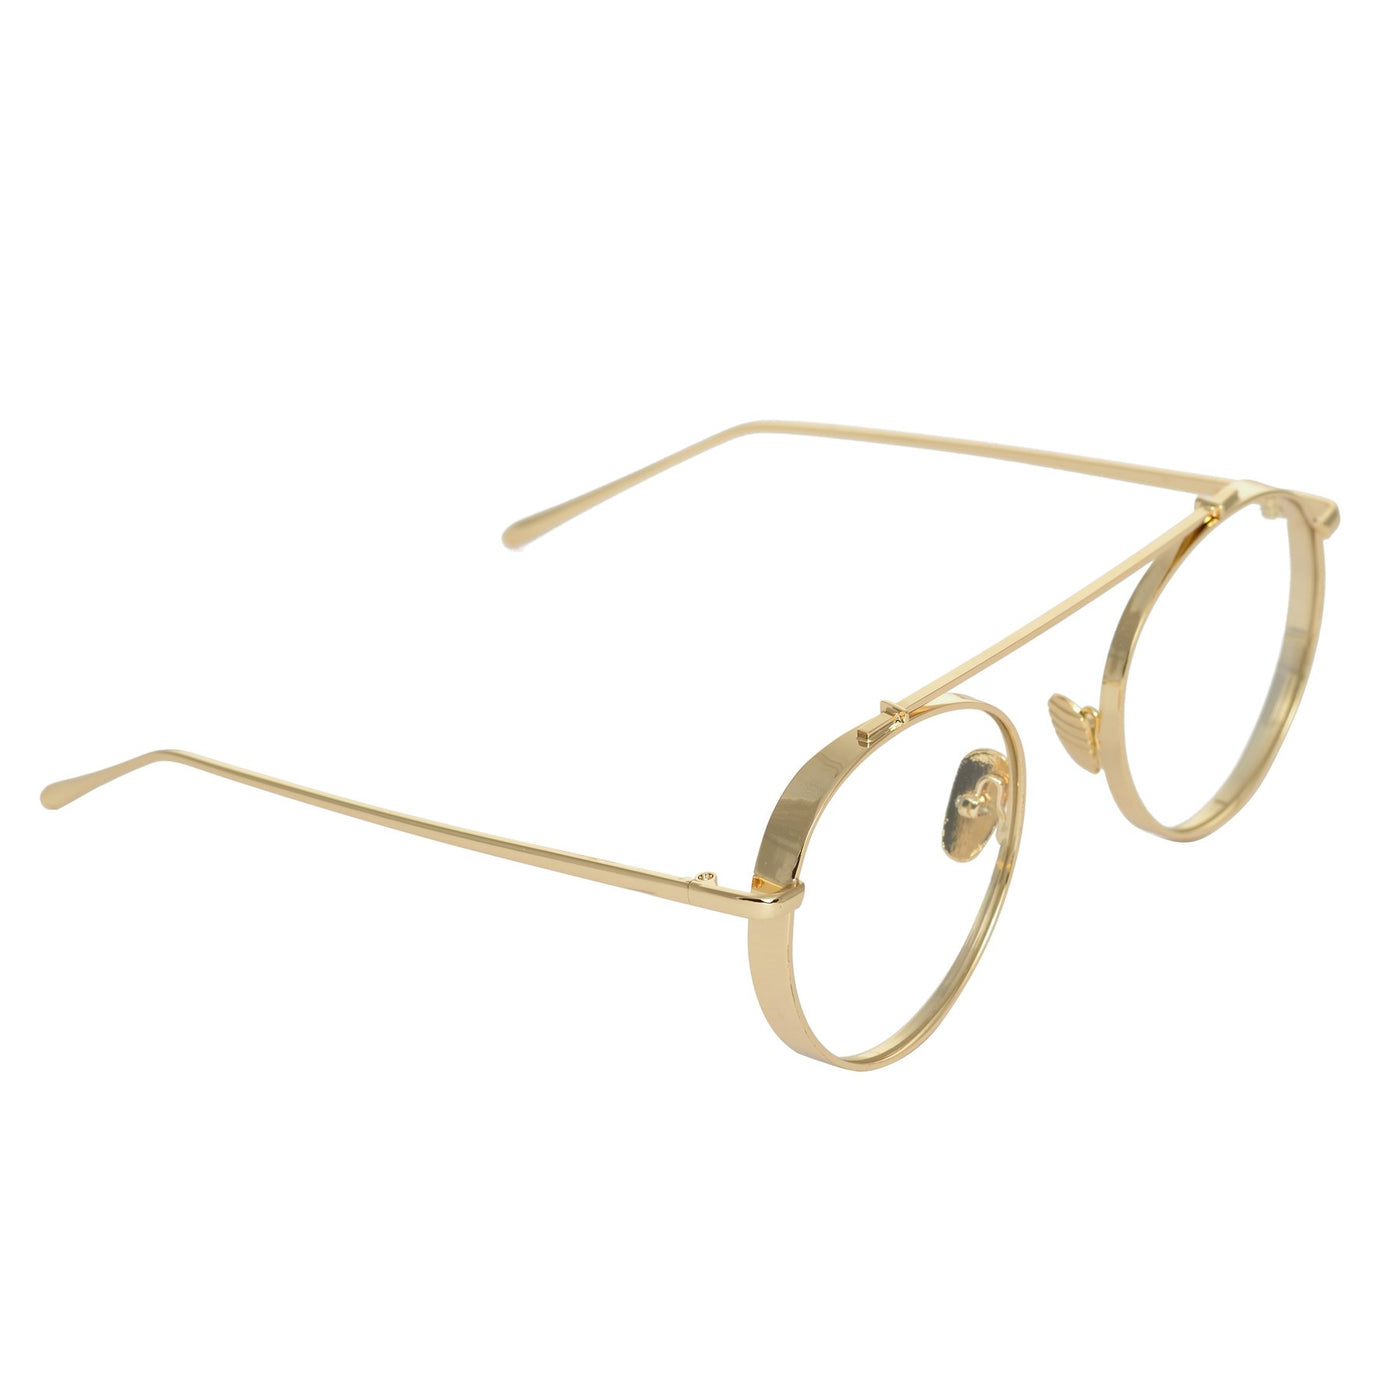 Round Gold Day Night Sunglasses For Men And Women-Unique and Classy